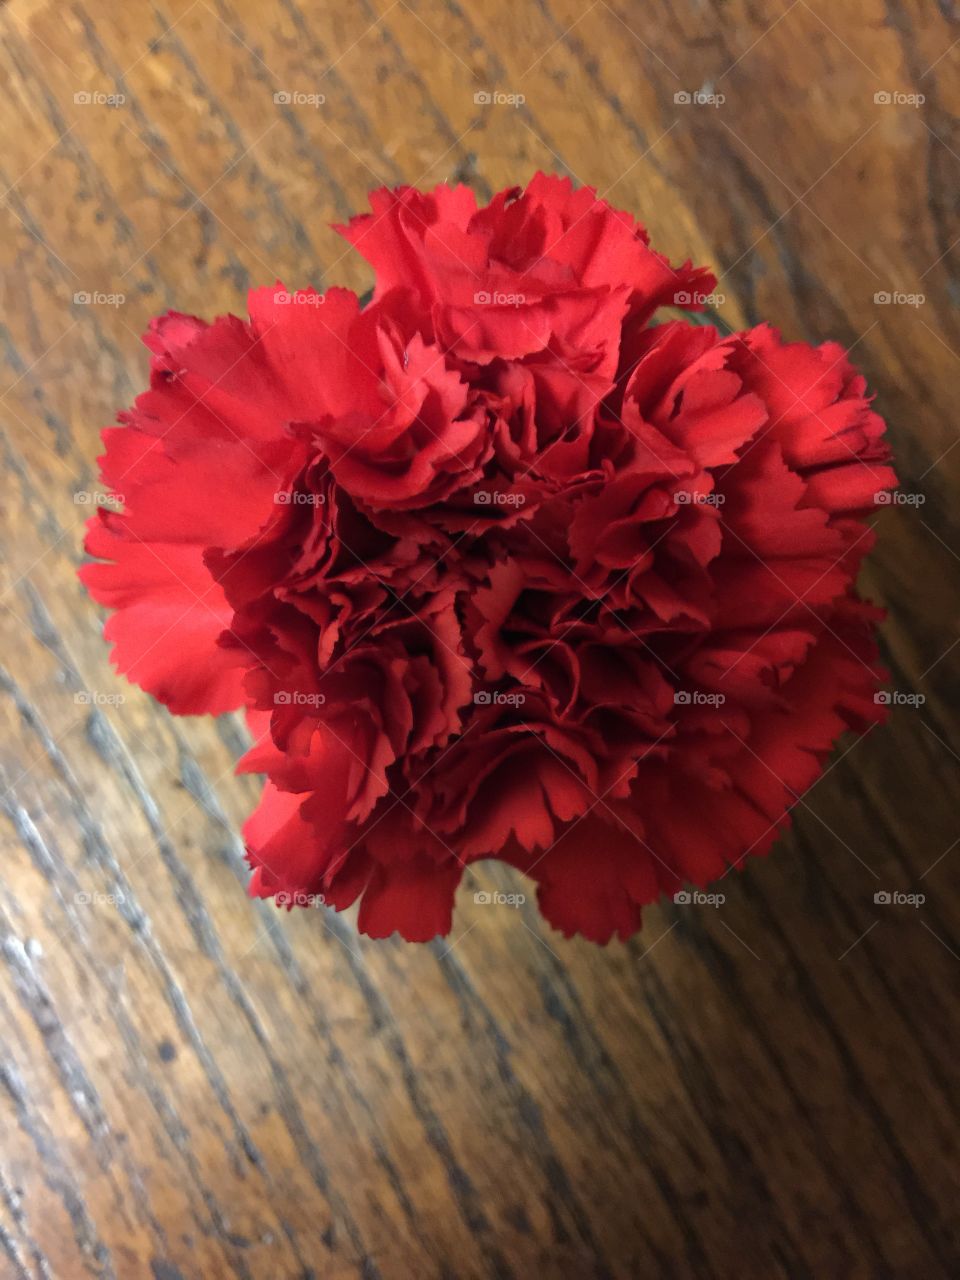 Red Carnation my fav in the world smells so sweet and spicy 